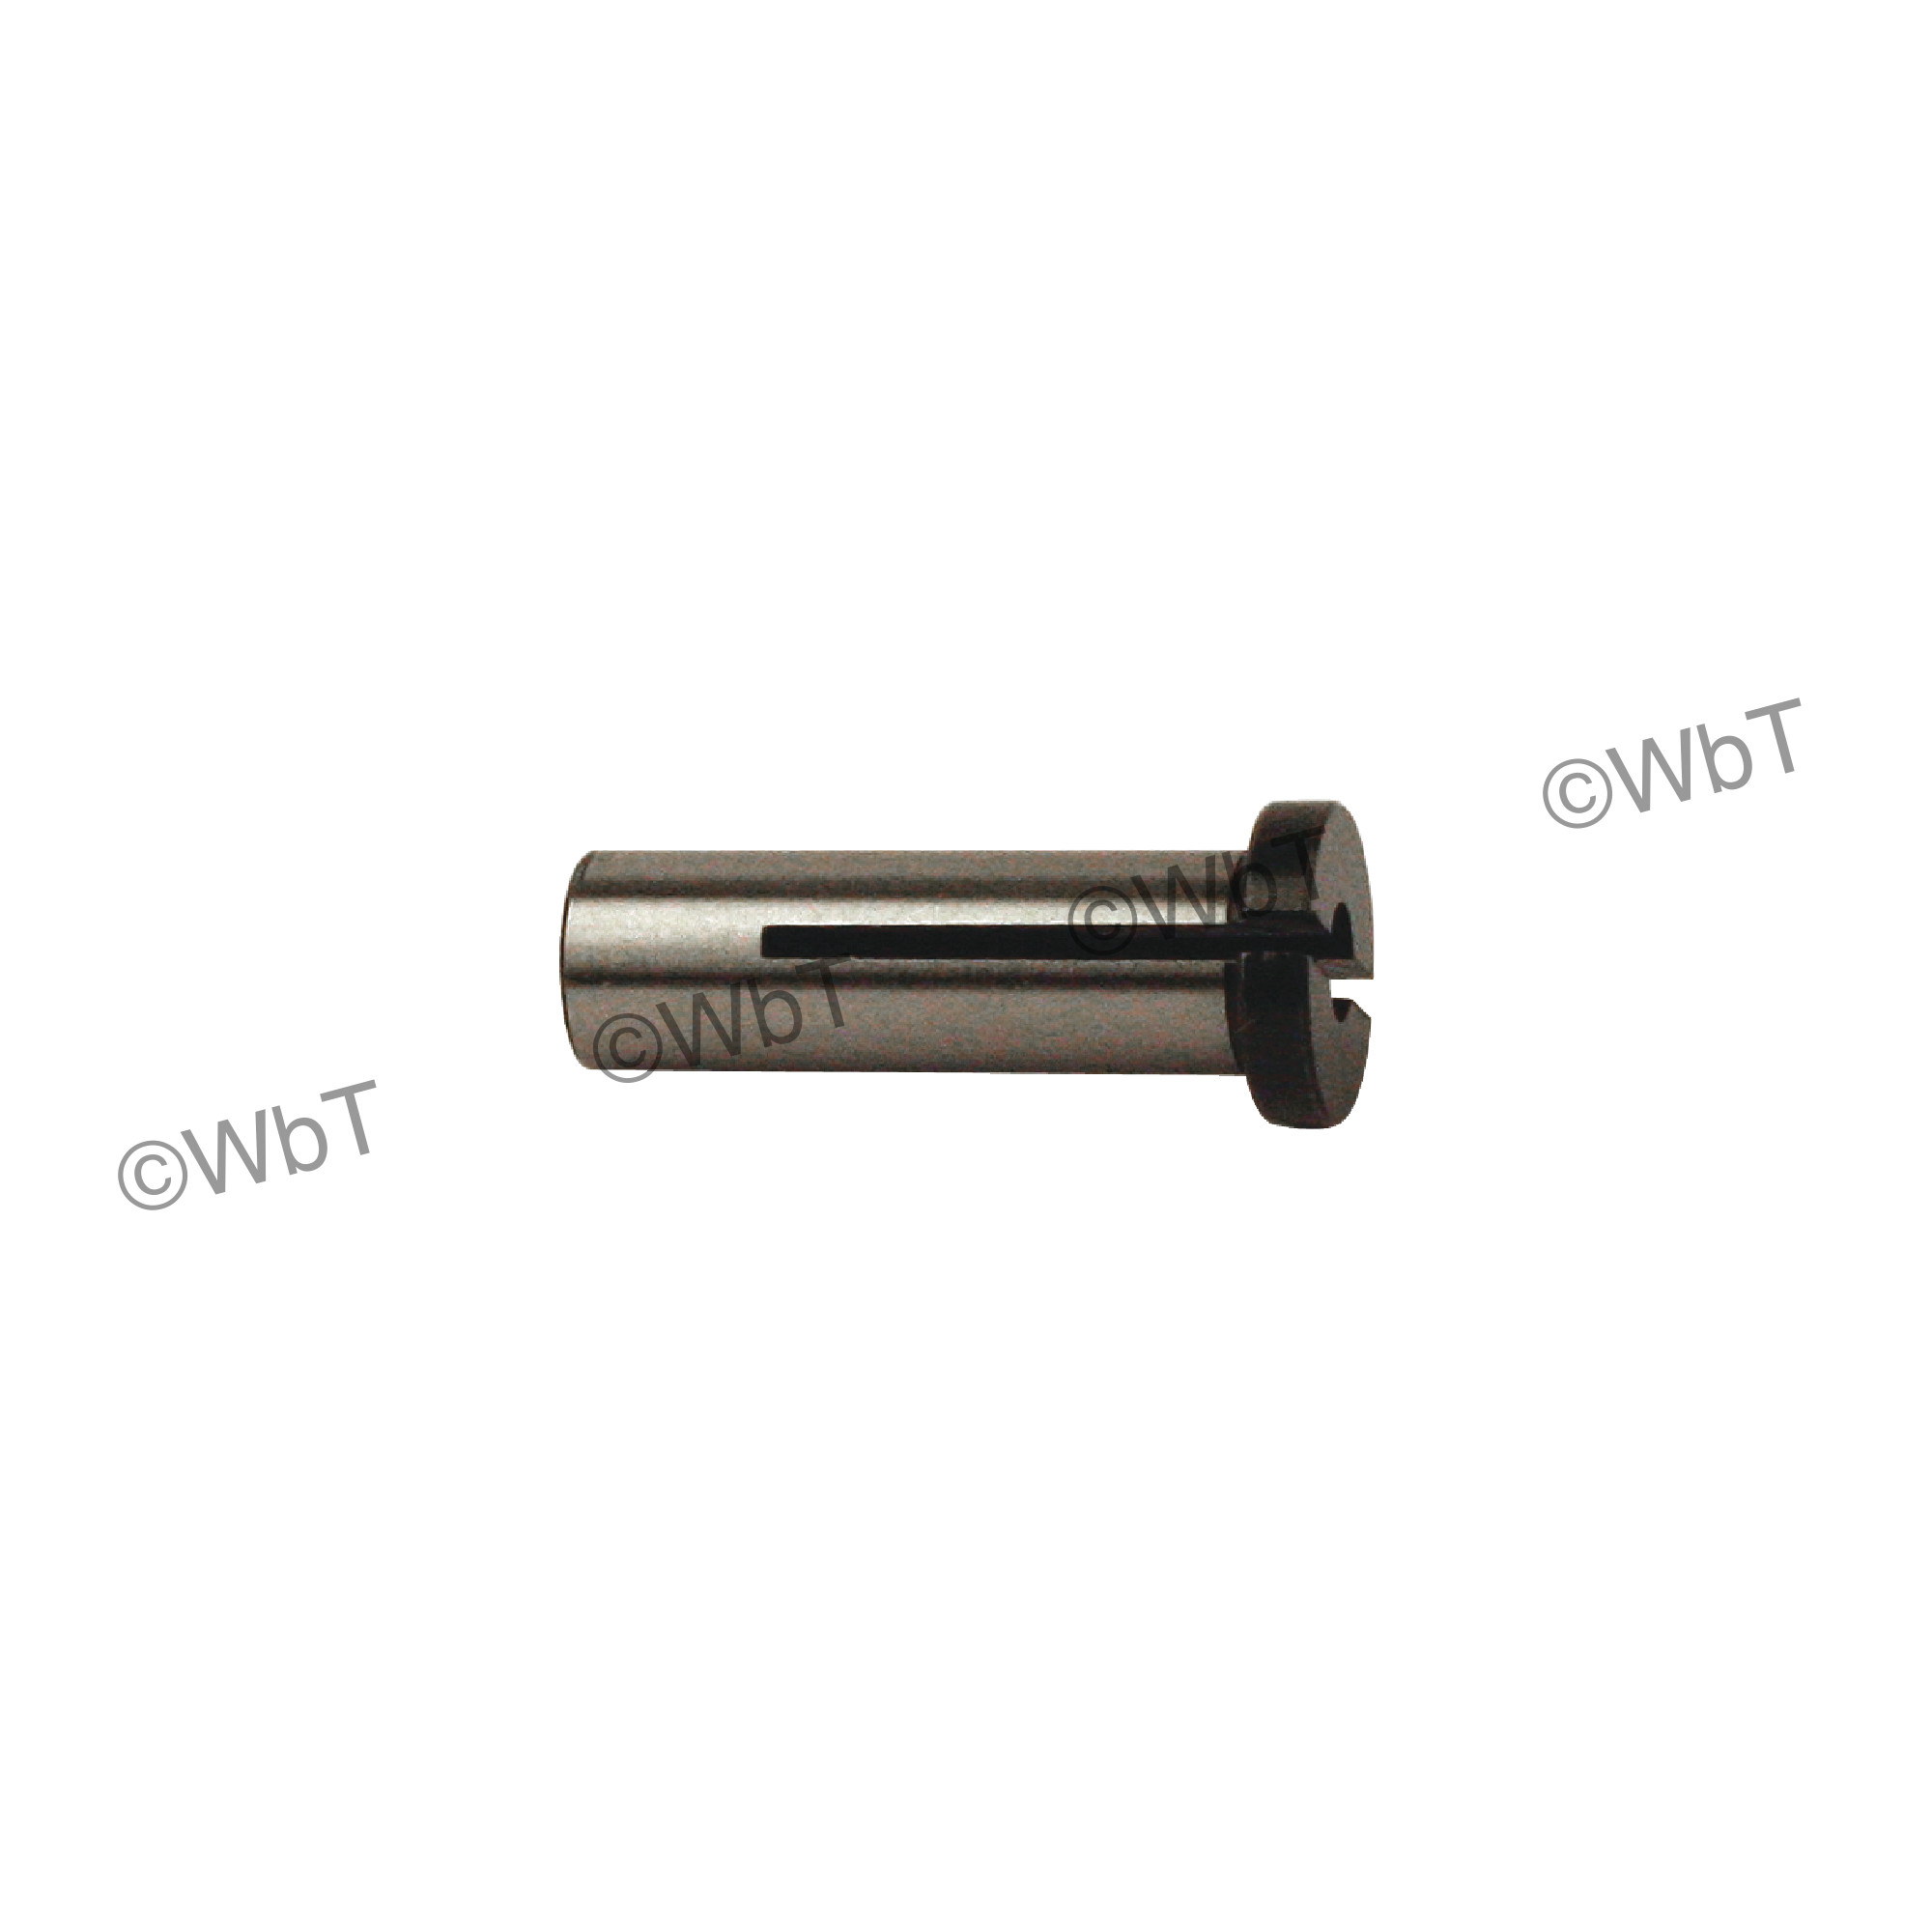 1/8" Collet Adapter